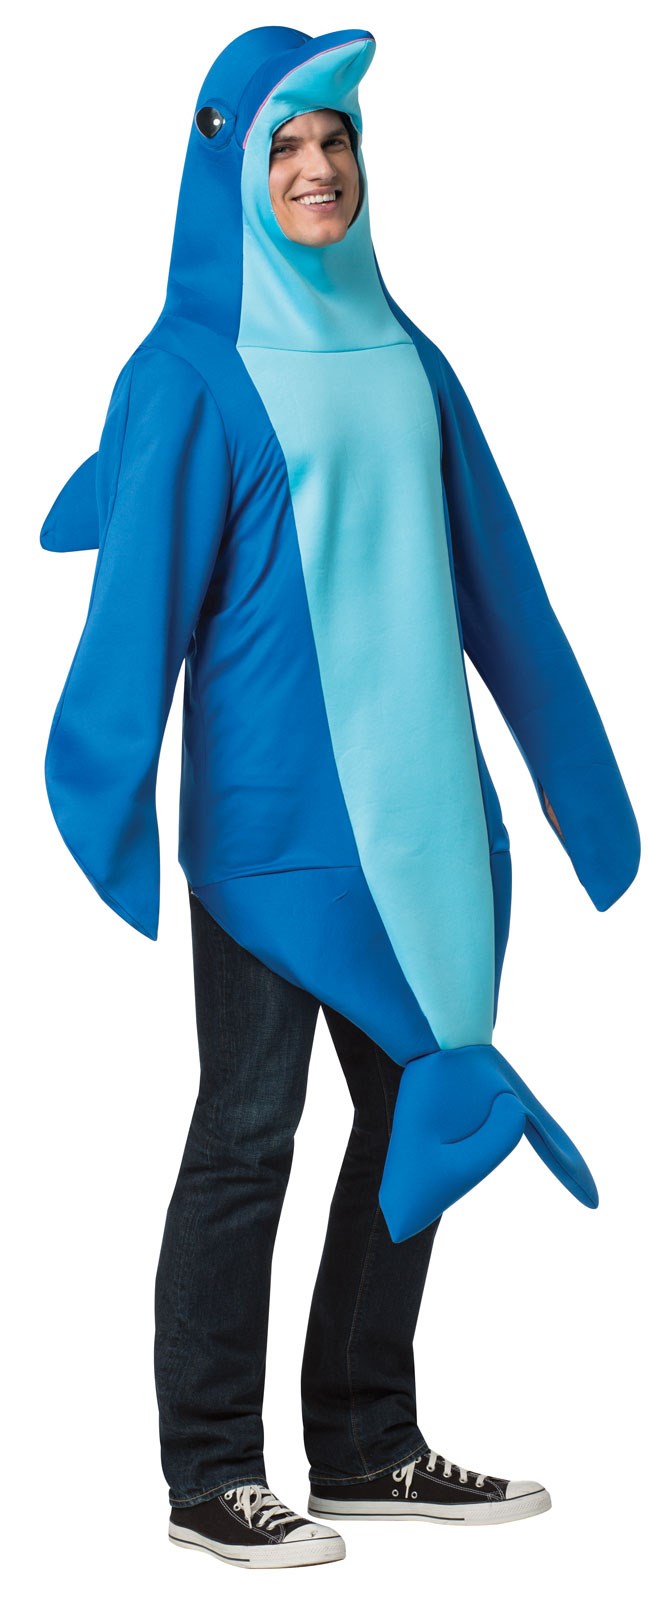 dolphin-costume-for-adults-bc-808576.jpg